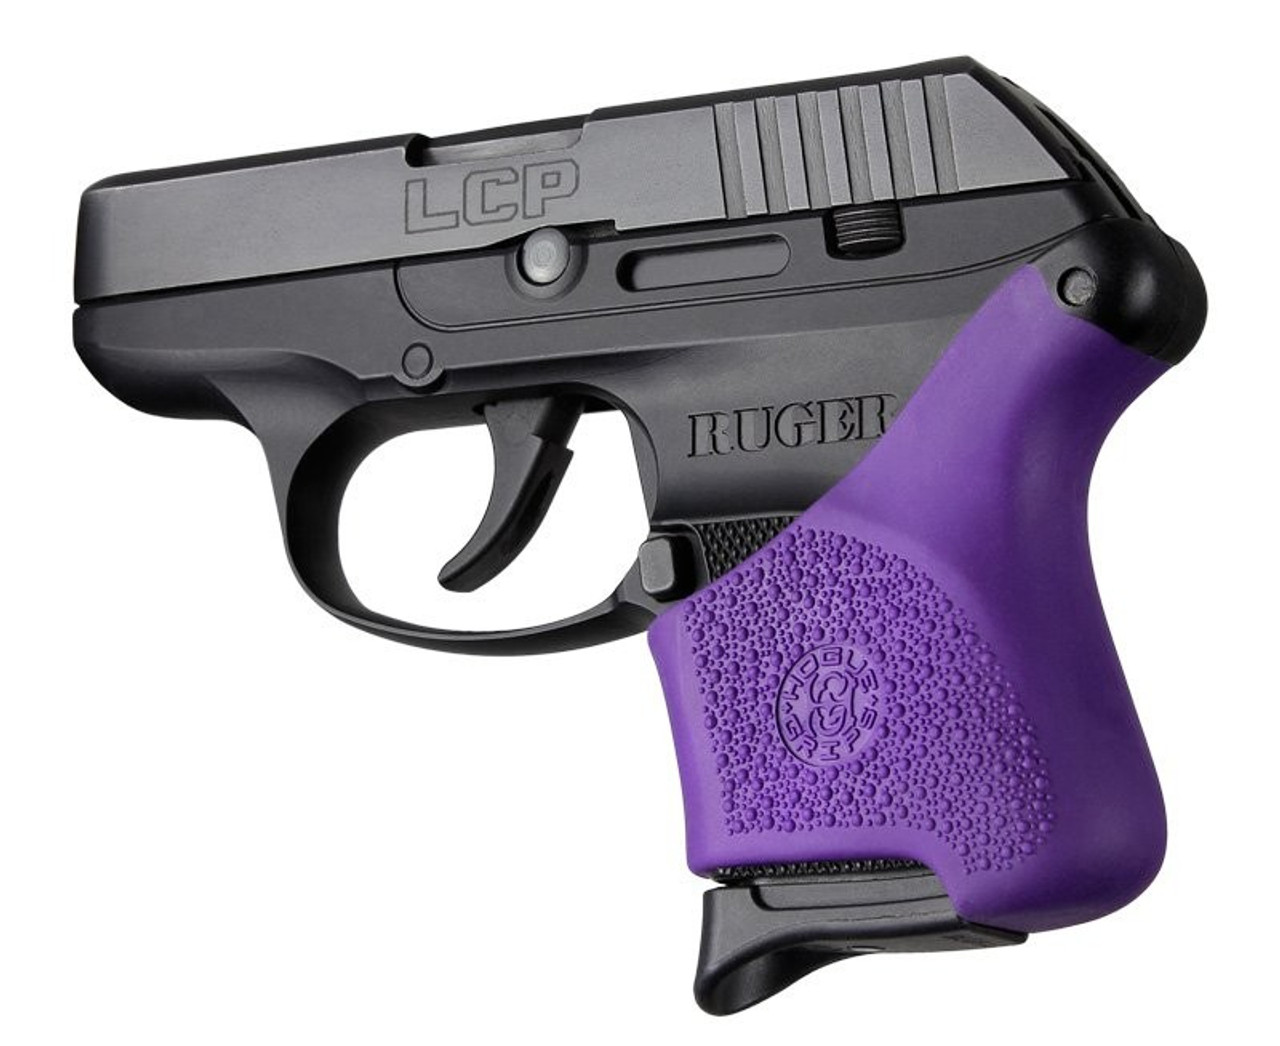 Hogue 18106 HandAll Hybrid Ruger LCP Grip Sleeve Purple